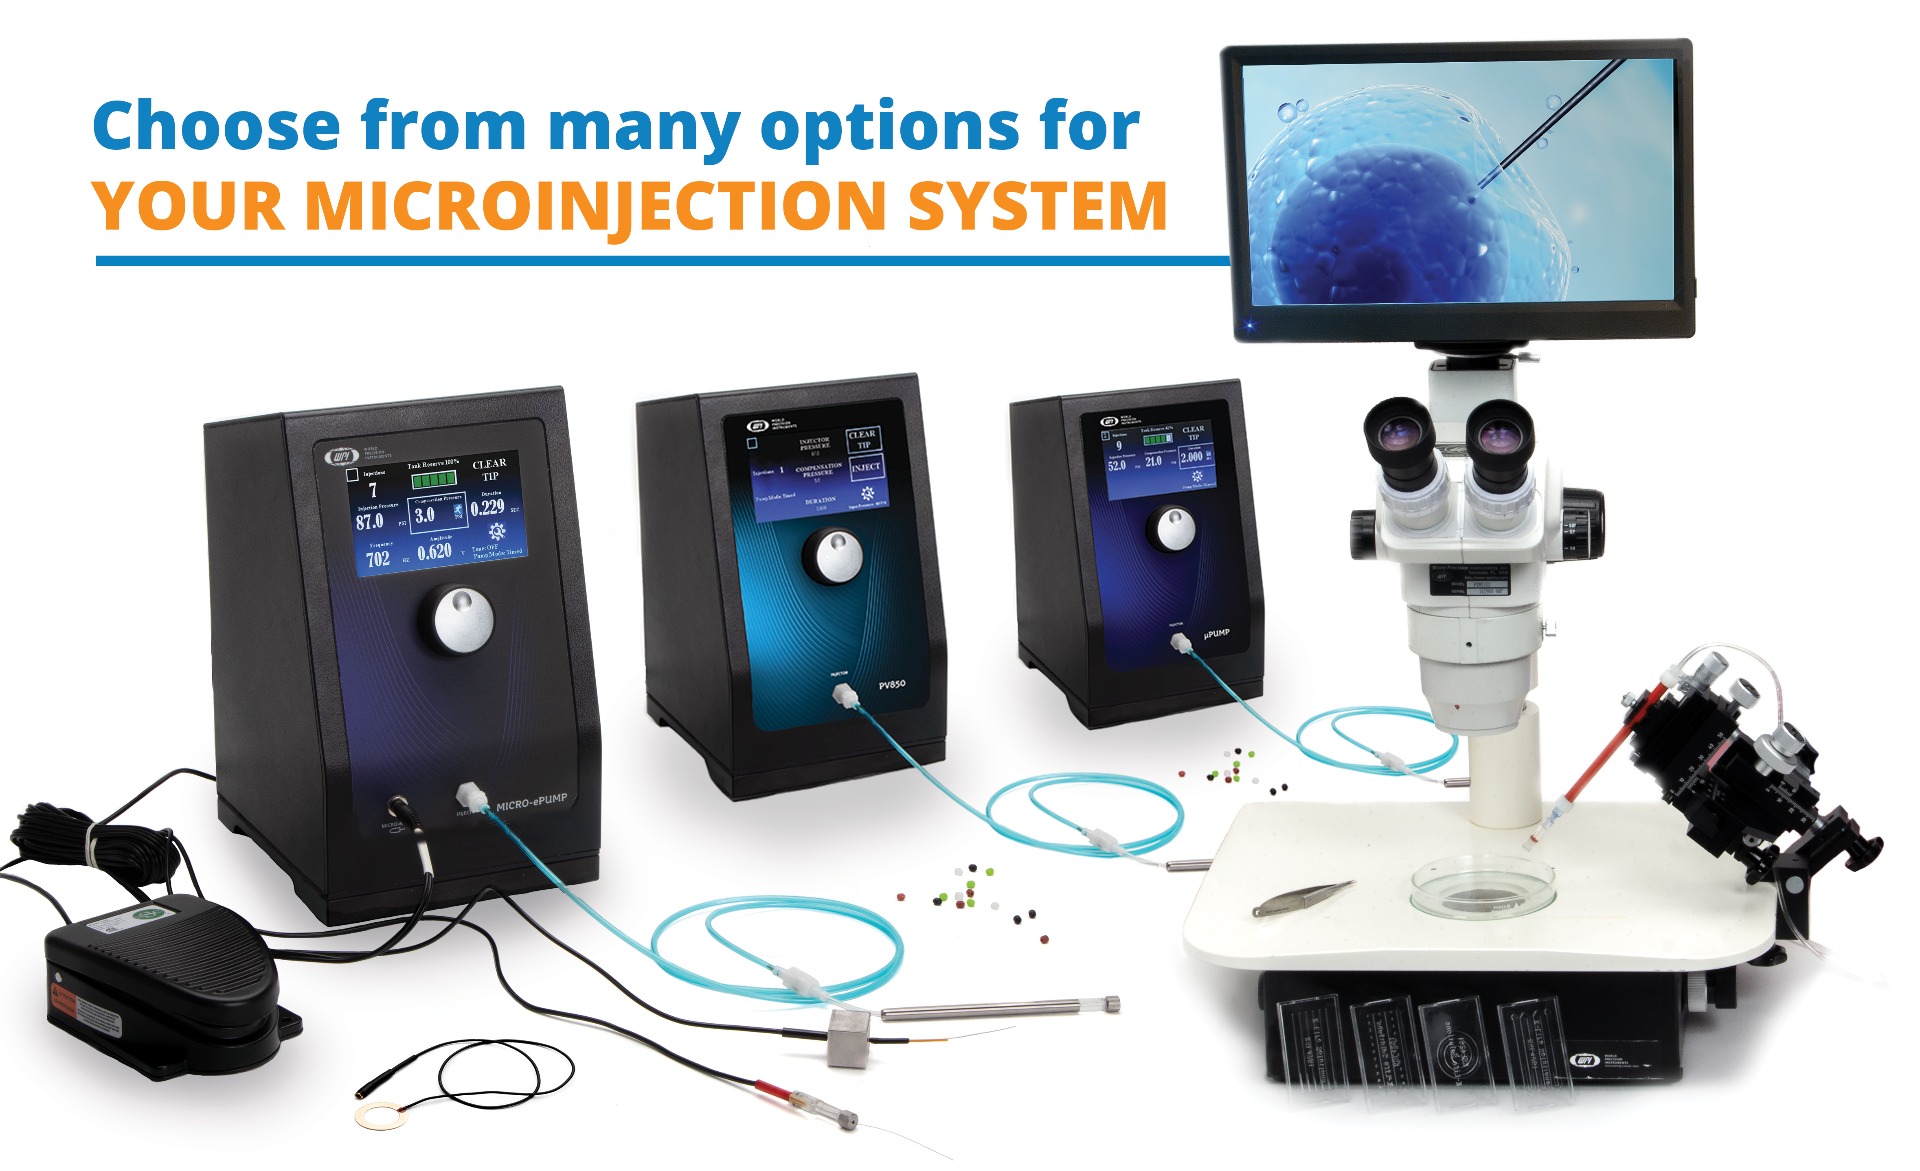 WPI is your one-stop shop for all microinjection needs. From microscopes and manipulators to pre-pulled glass pipettes, WPI offers many options for your microinjection system. 